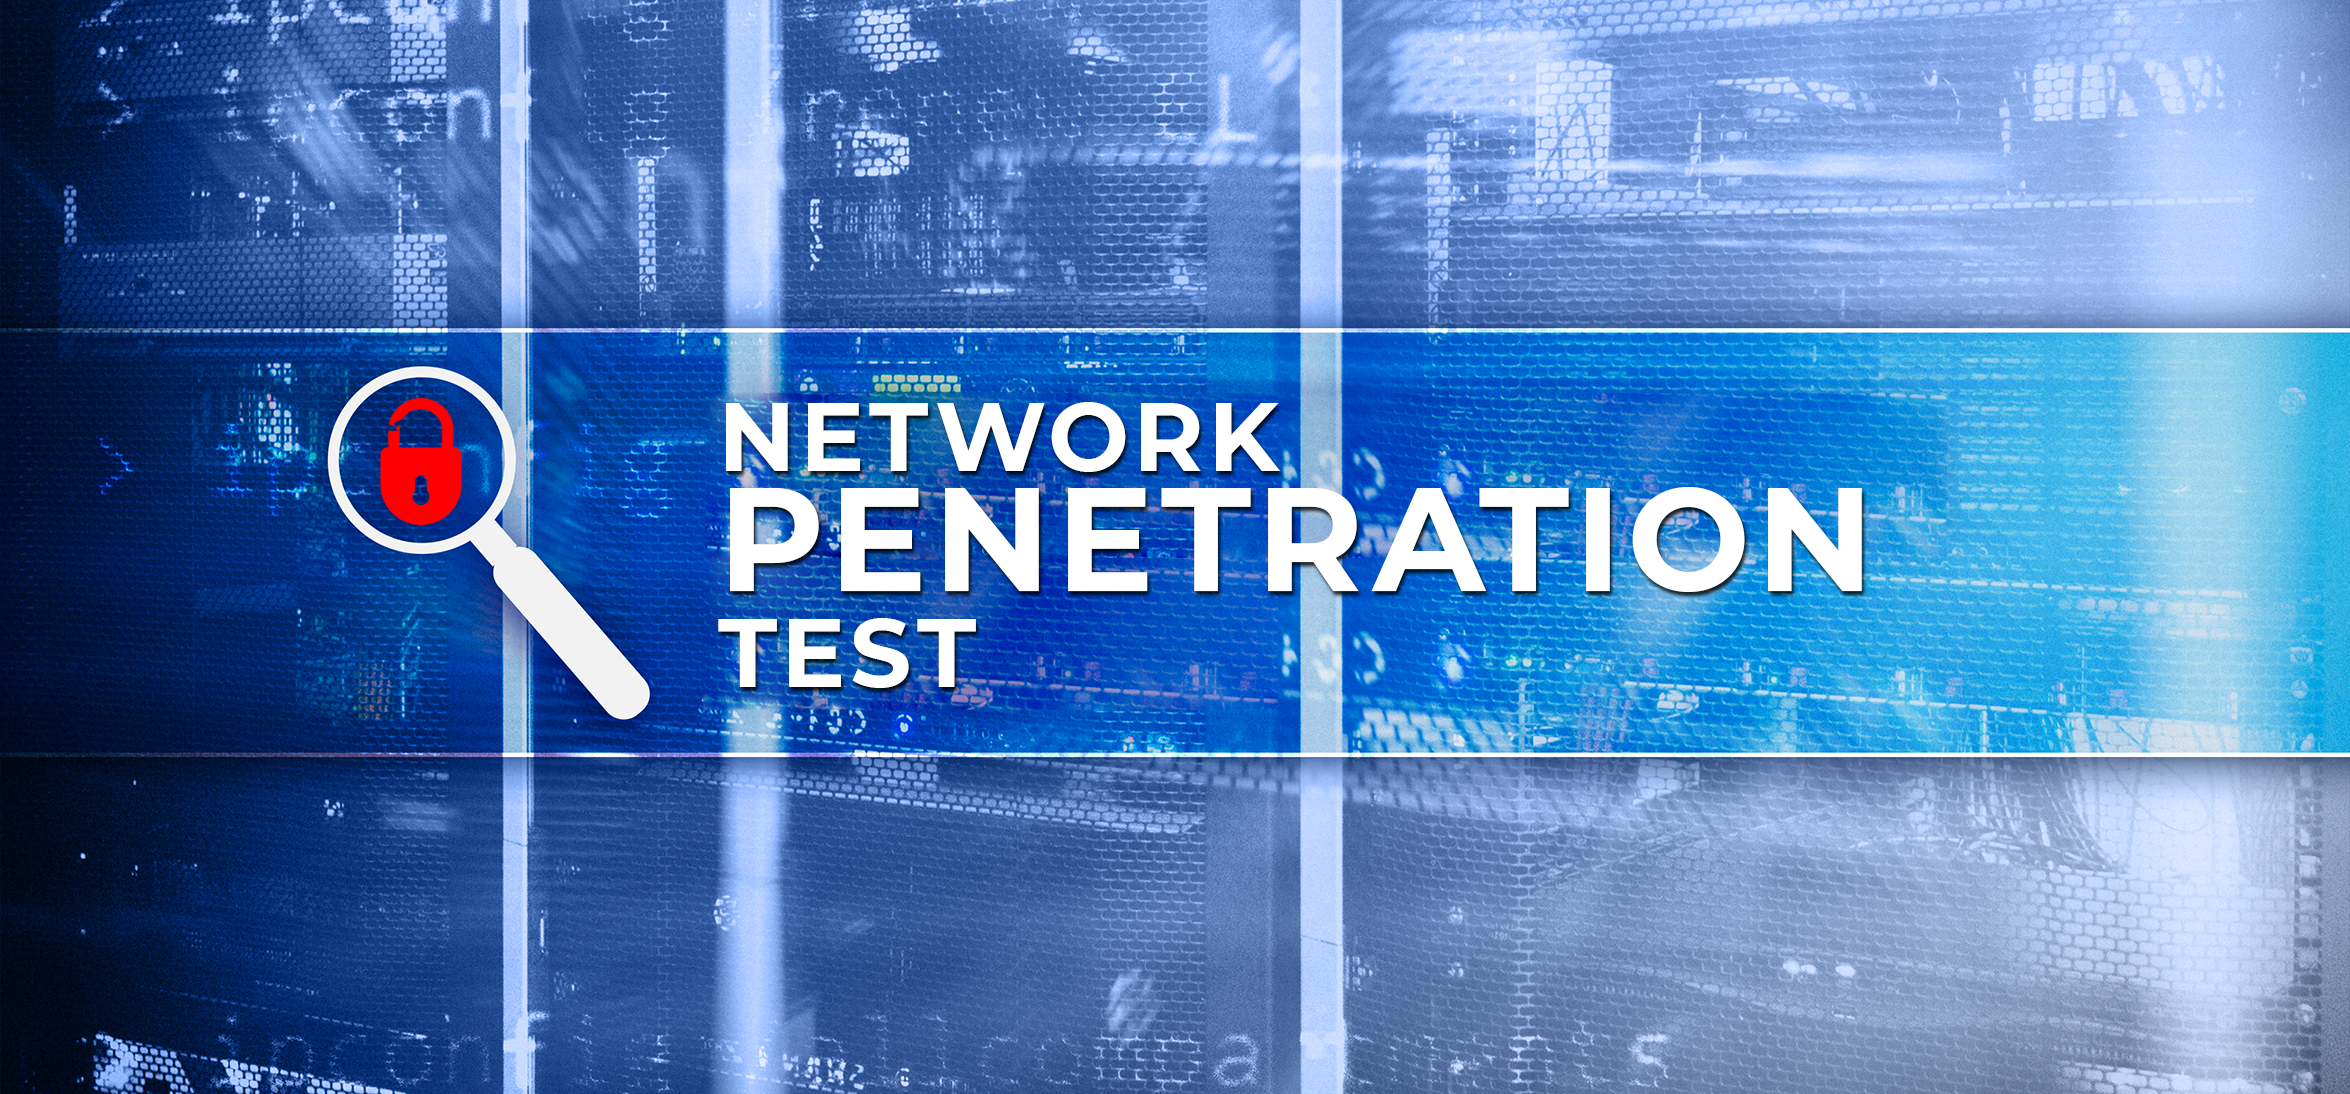 Penetration Testing Services in South Branch NJ, 08876